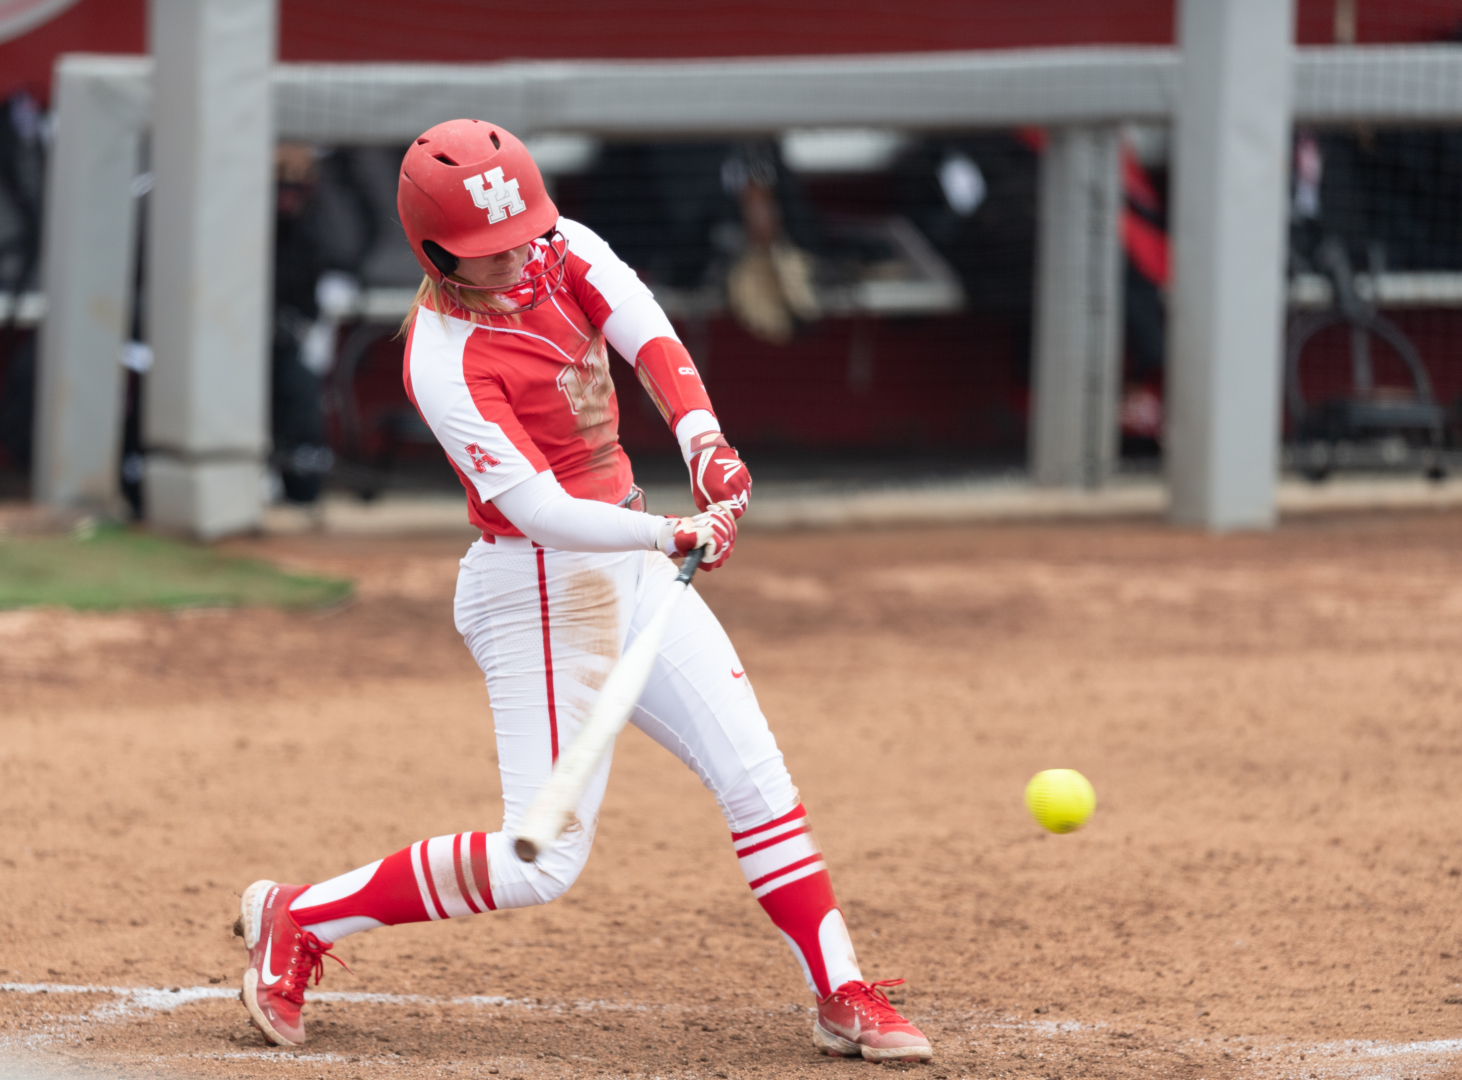 UH softball split its weekend series against Baylor to move to 9-13 on the season | Courtesy of UH athletics